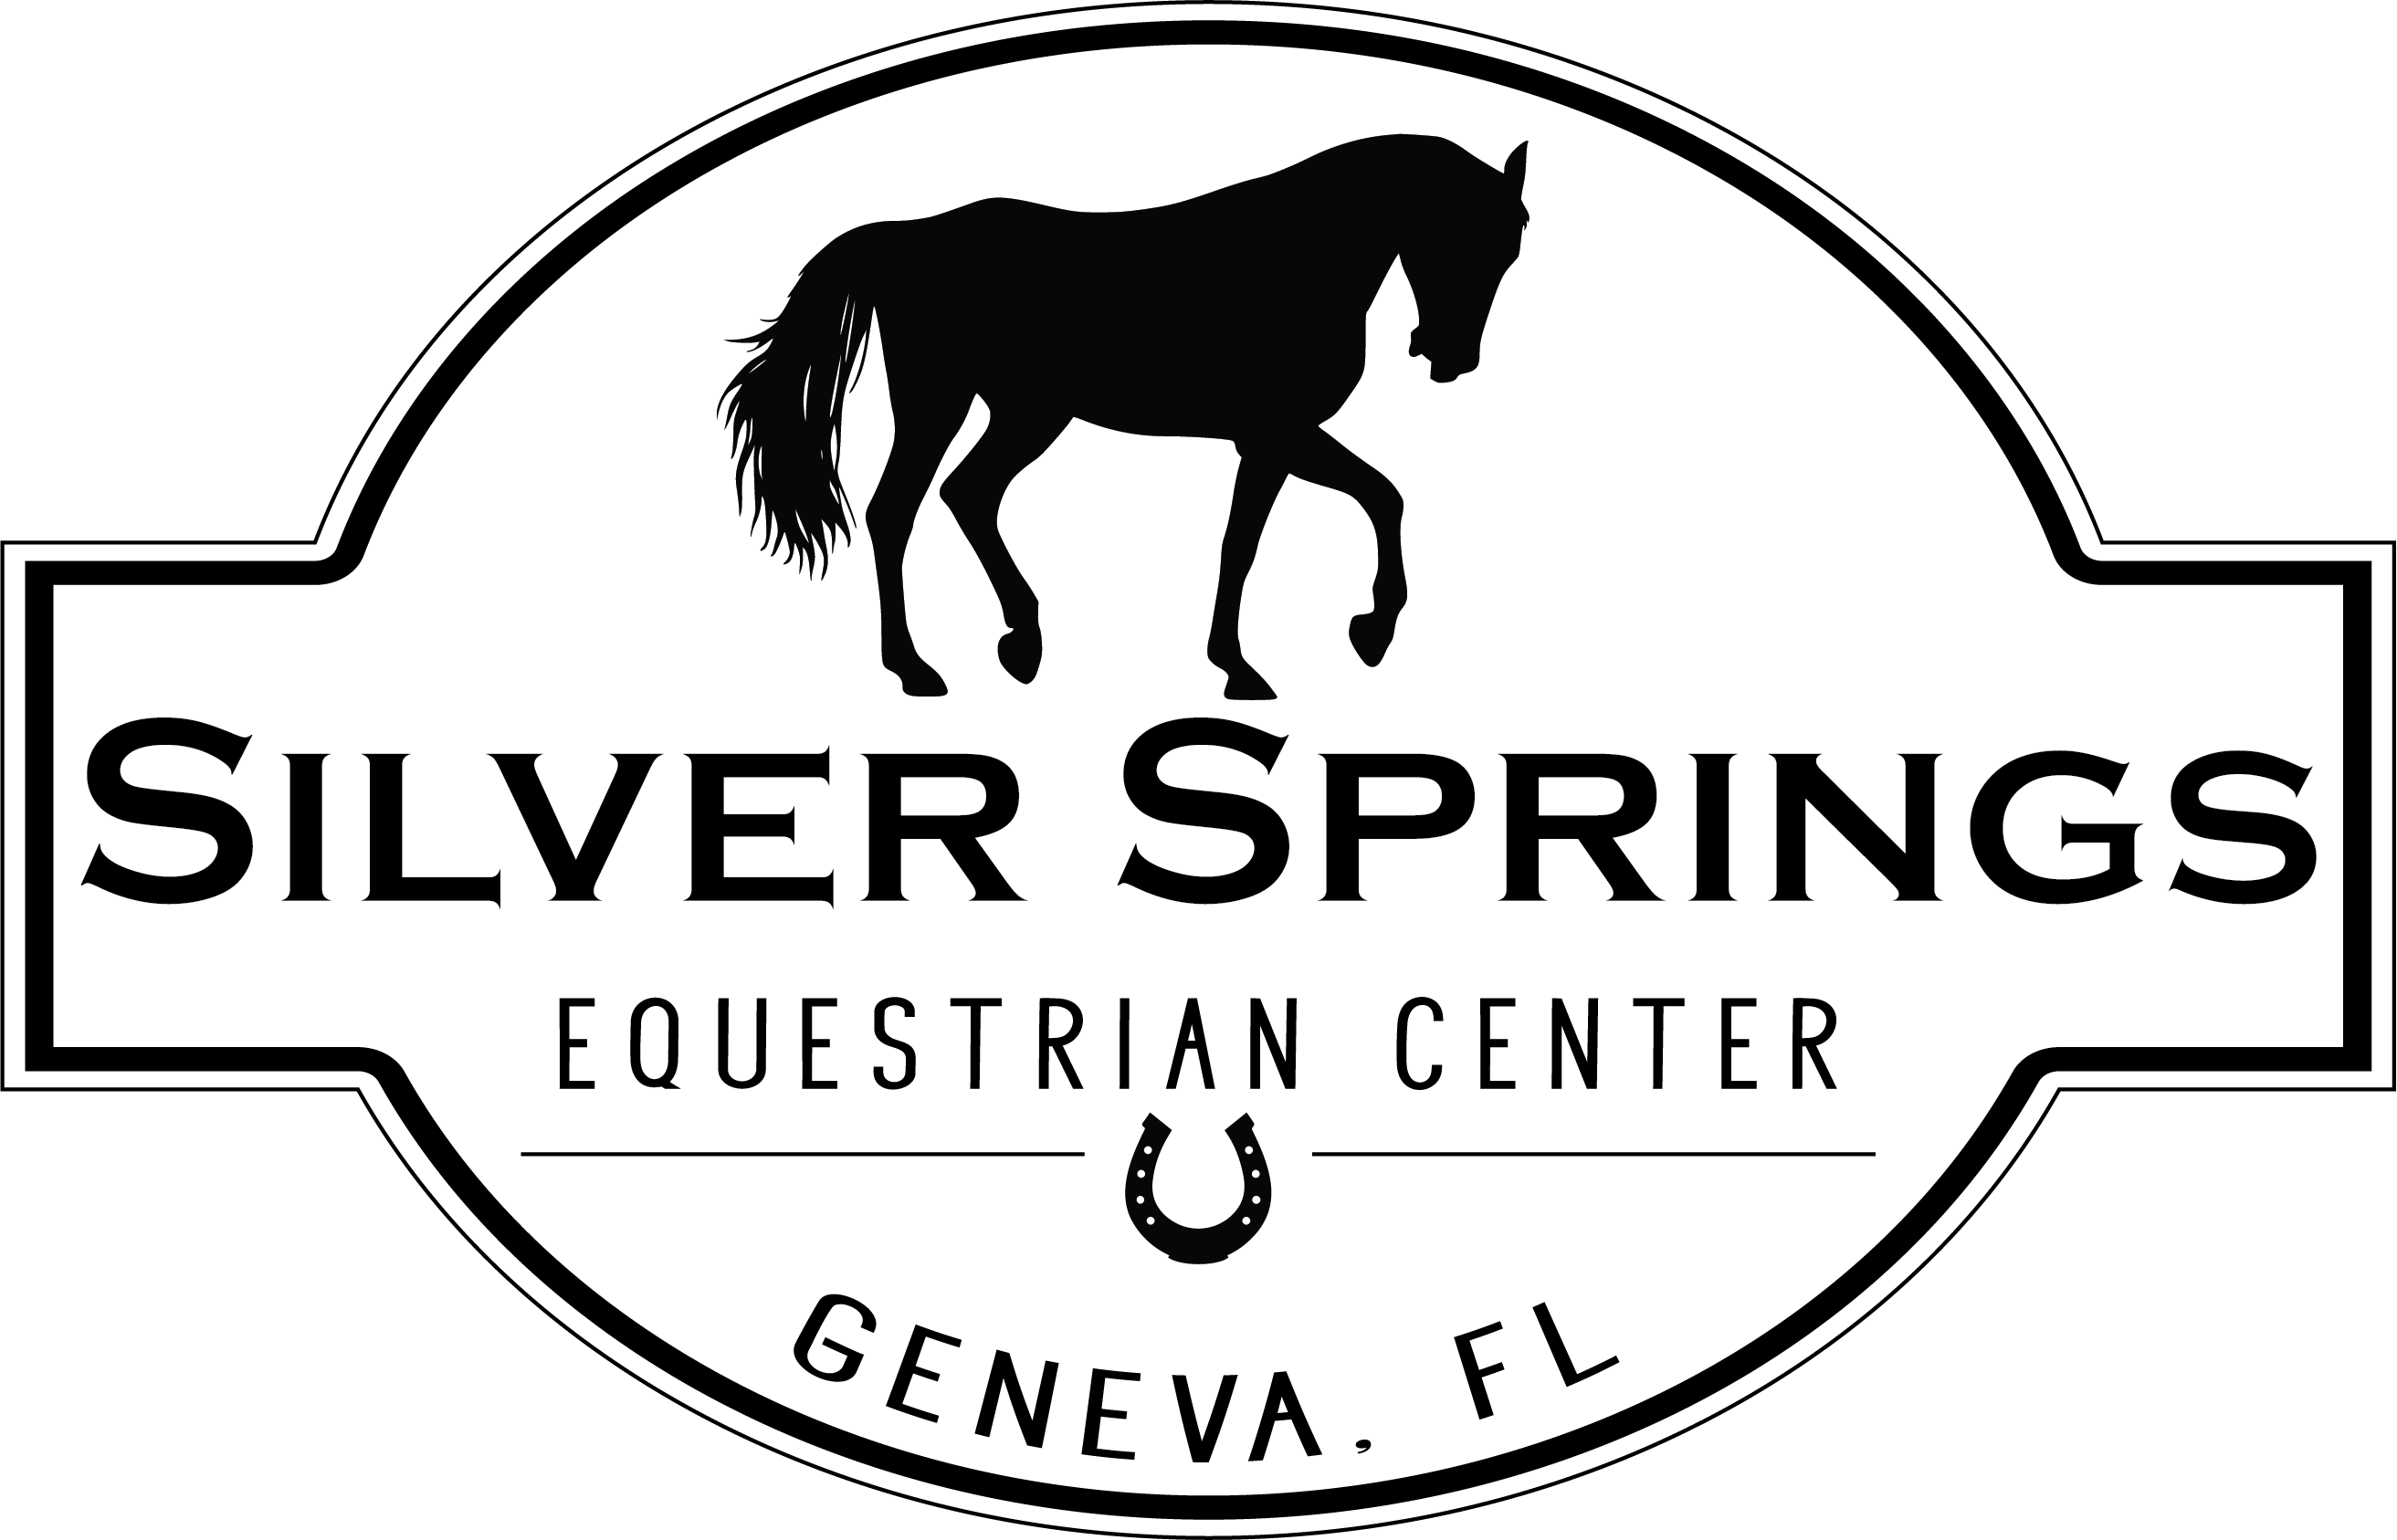 Silver Springs Equestrian Center Online Store